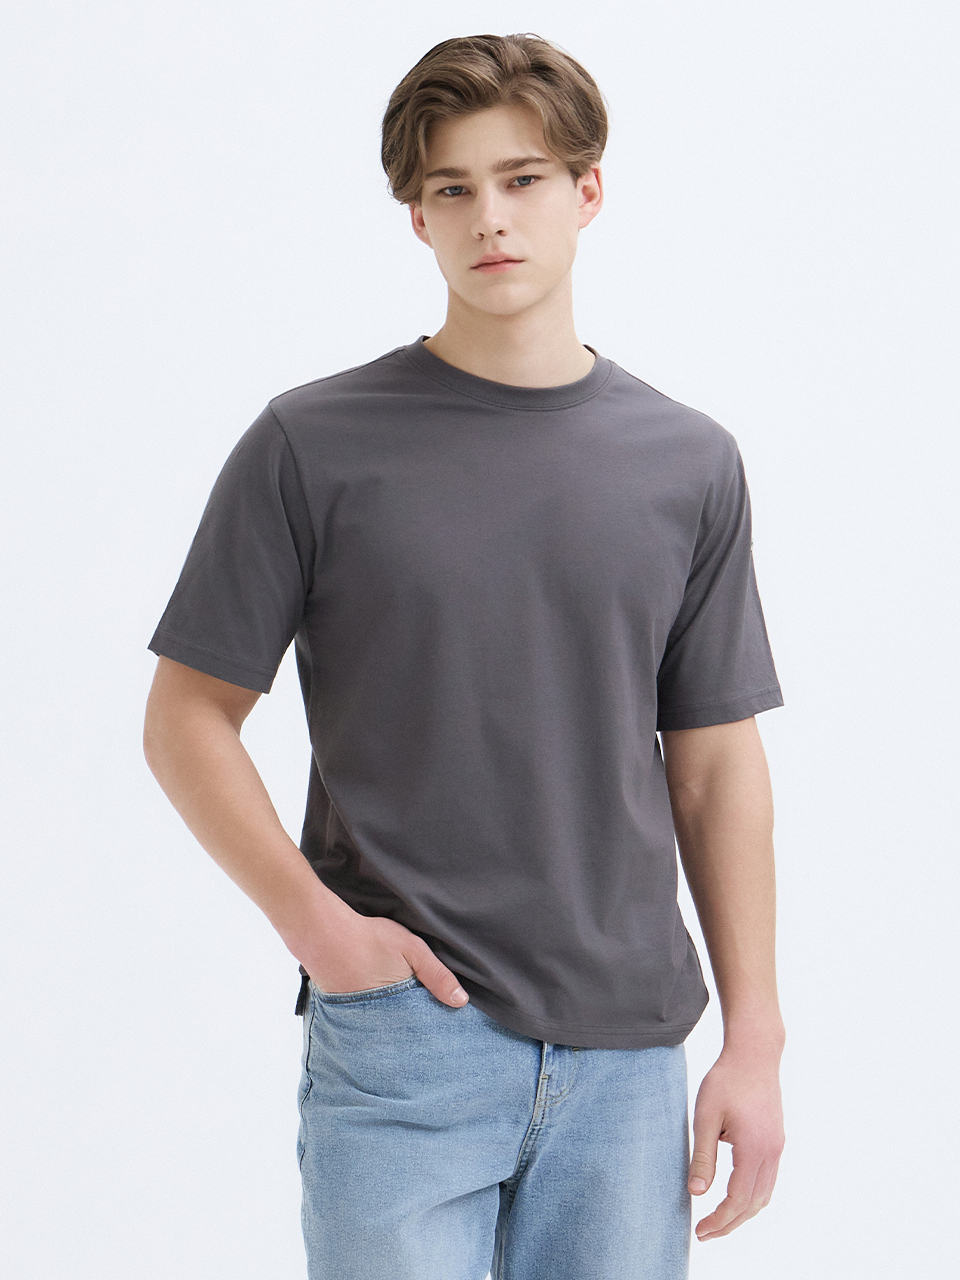 SIGNATURE CLASSIC STRIPE T-SHIRTS (FOR MEN) - SMOKY CHARCOAL